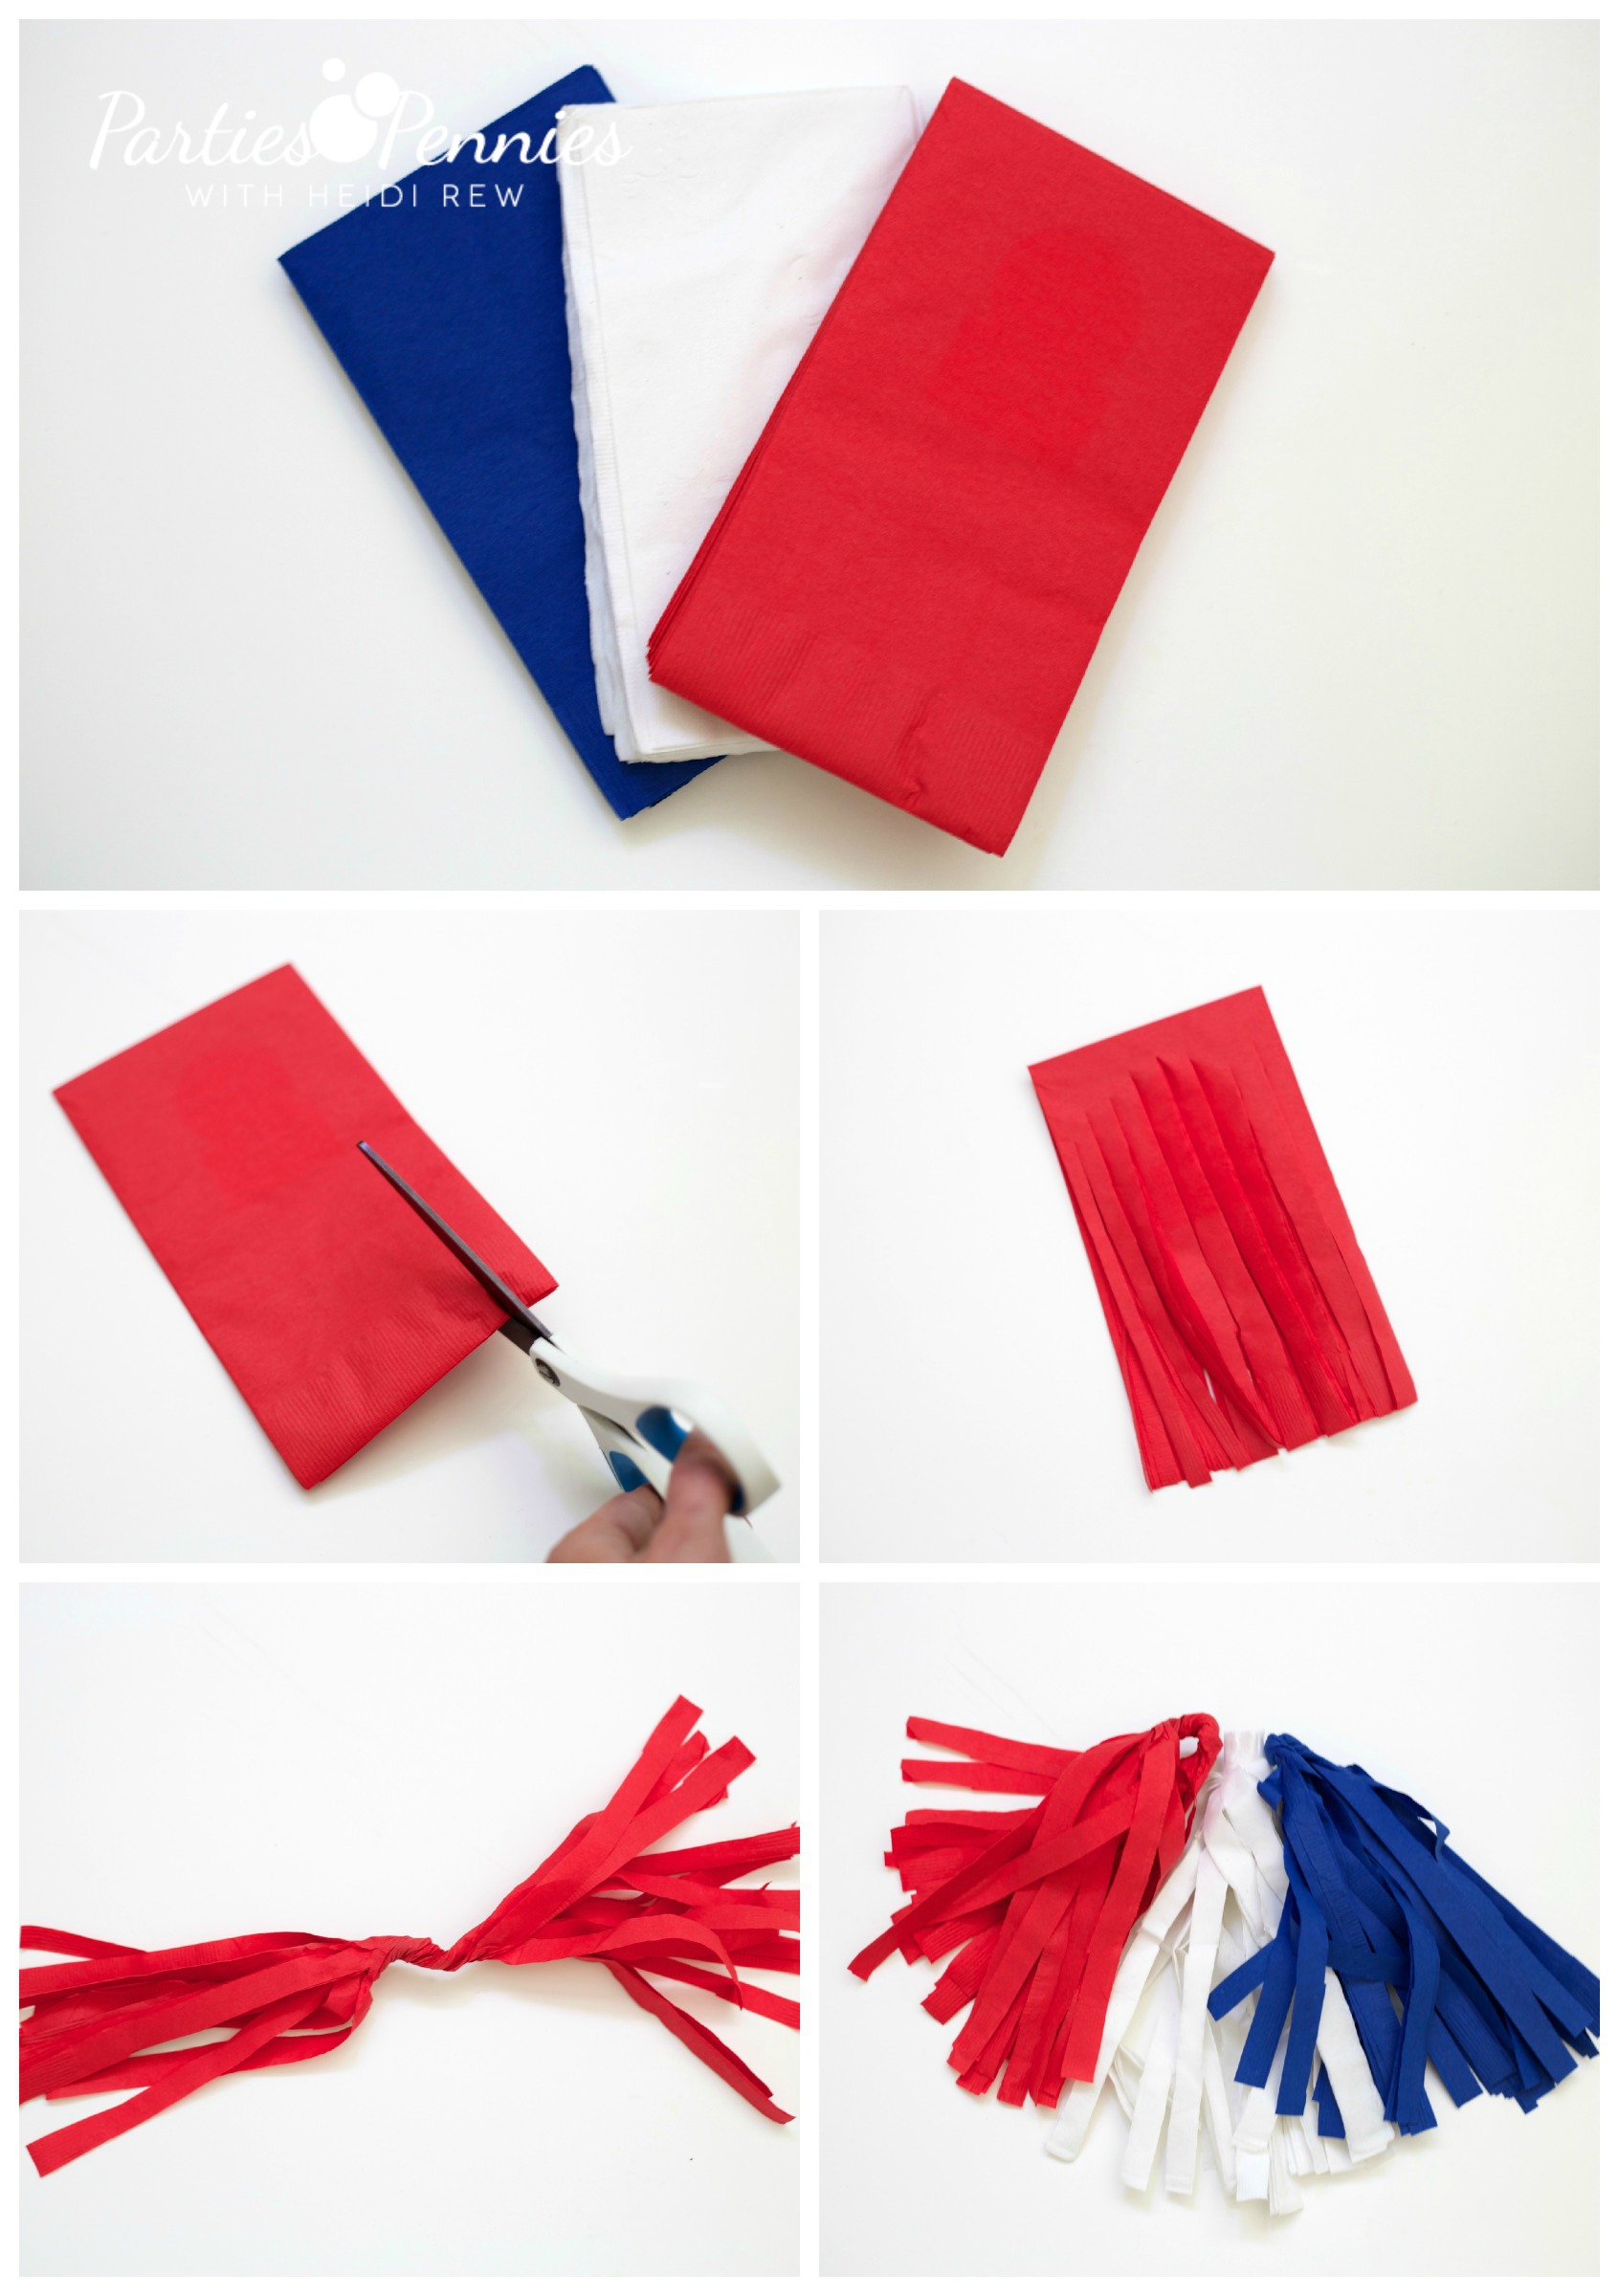 DIY Party Tassels | How to Make Party Tassels from Napkins